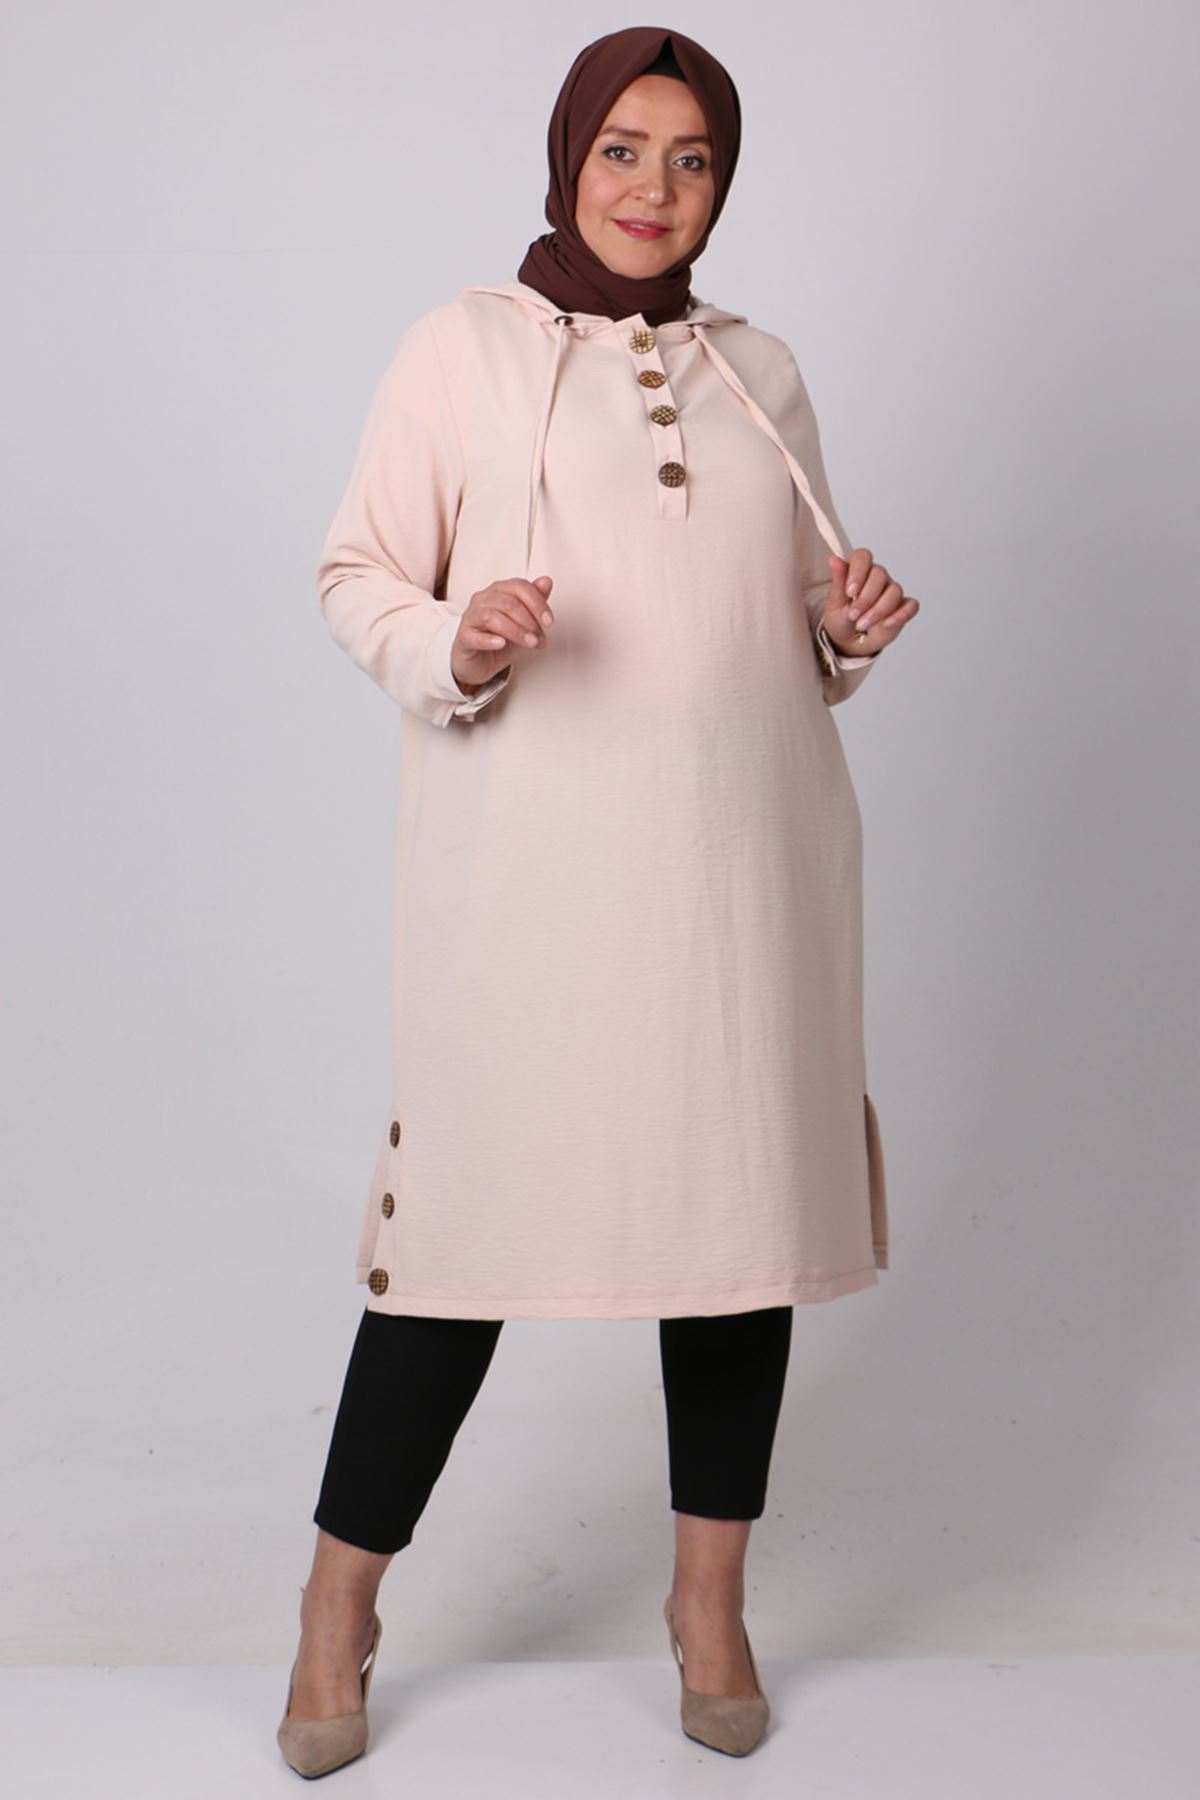 38004 Large Size Buttoned Airobin Tunic -Beige